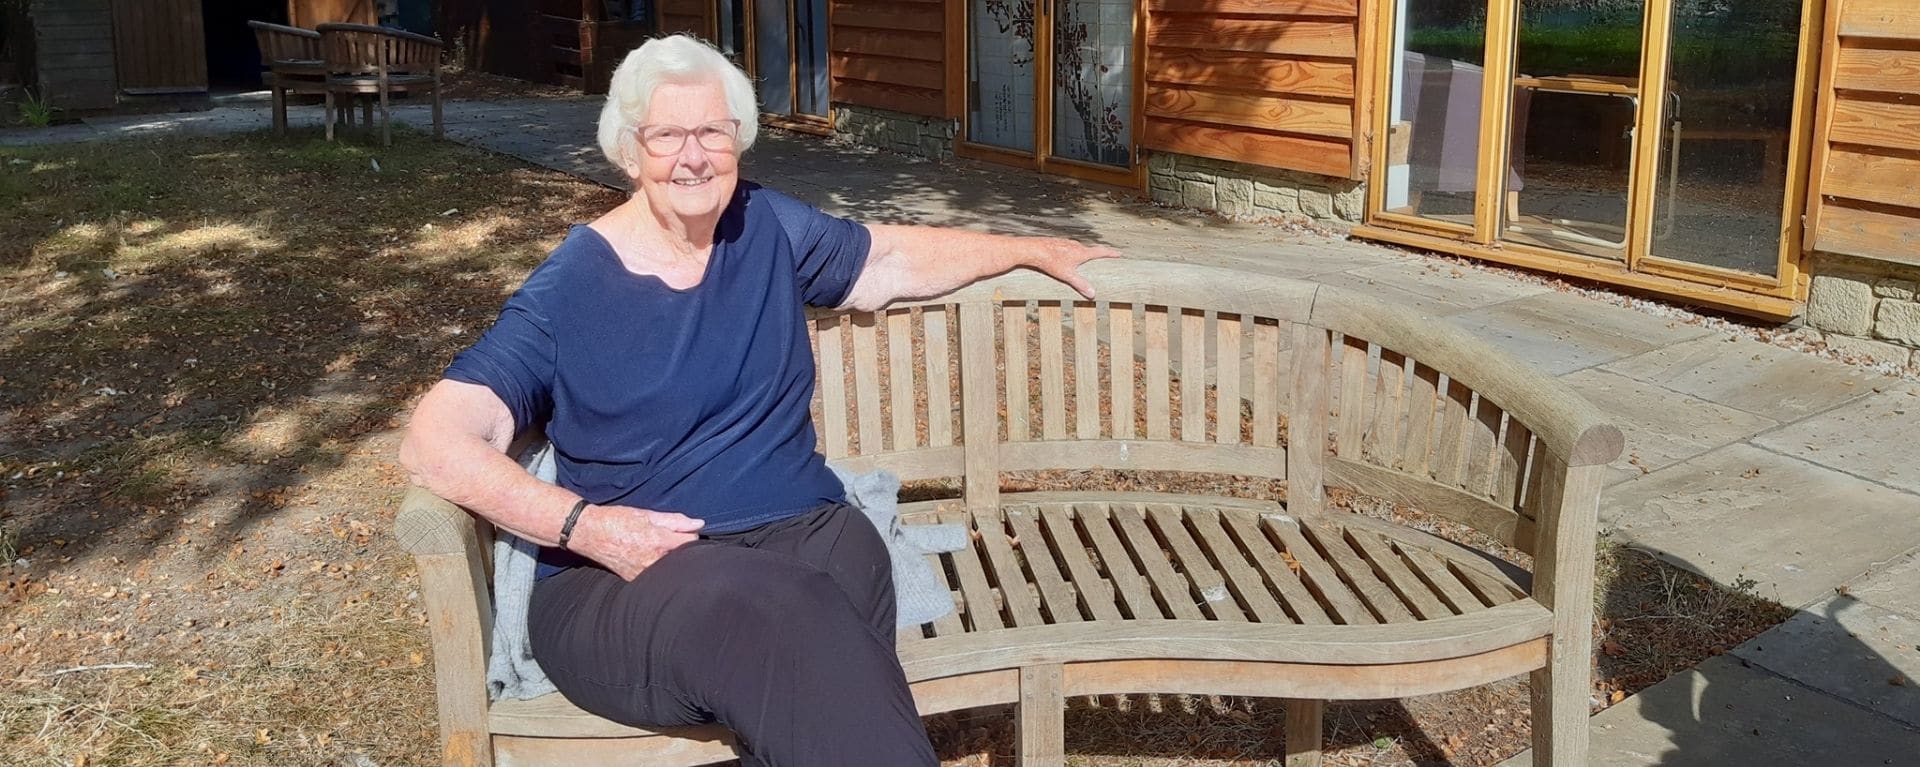 Laurel Care Home resident sat on the bench in the garden on a sunny day